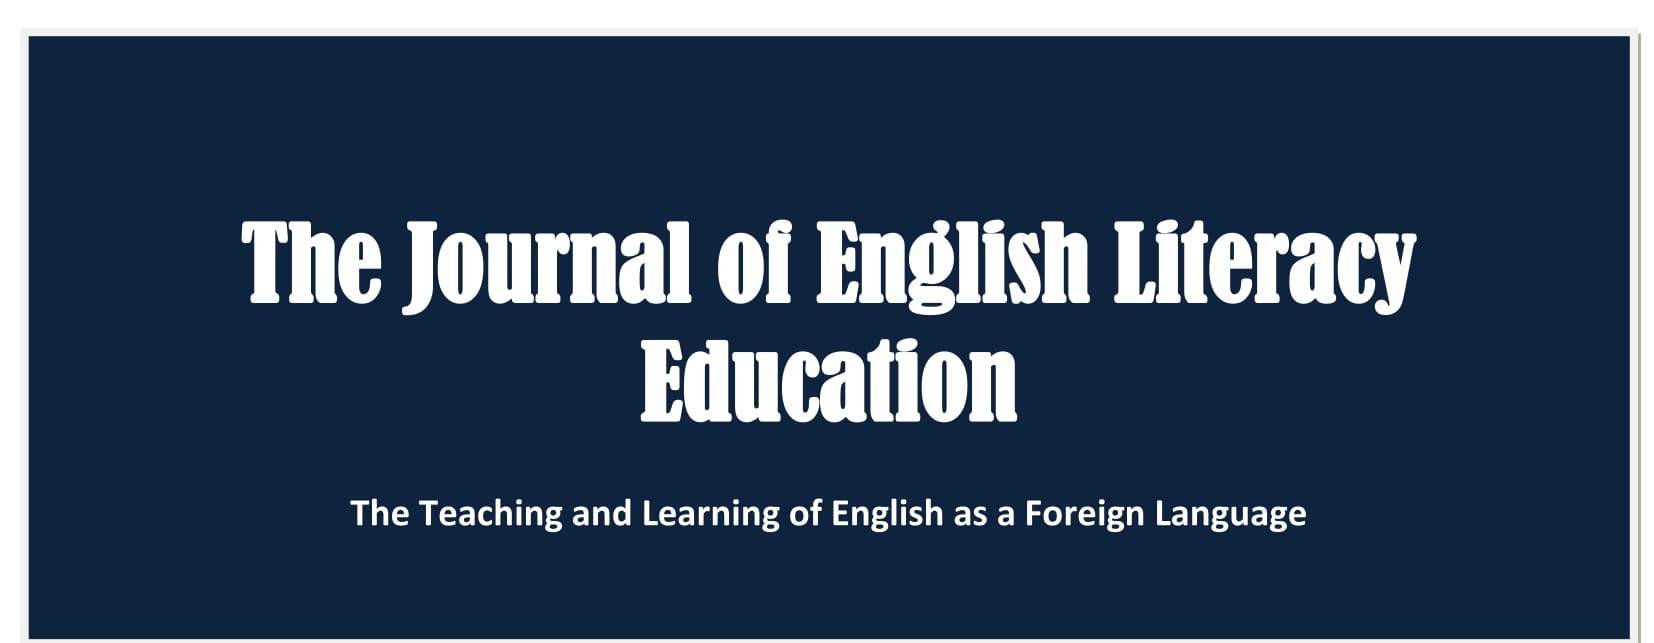 The Teaching and Learning of English as a Foreign Language